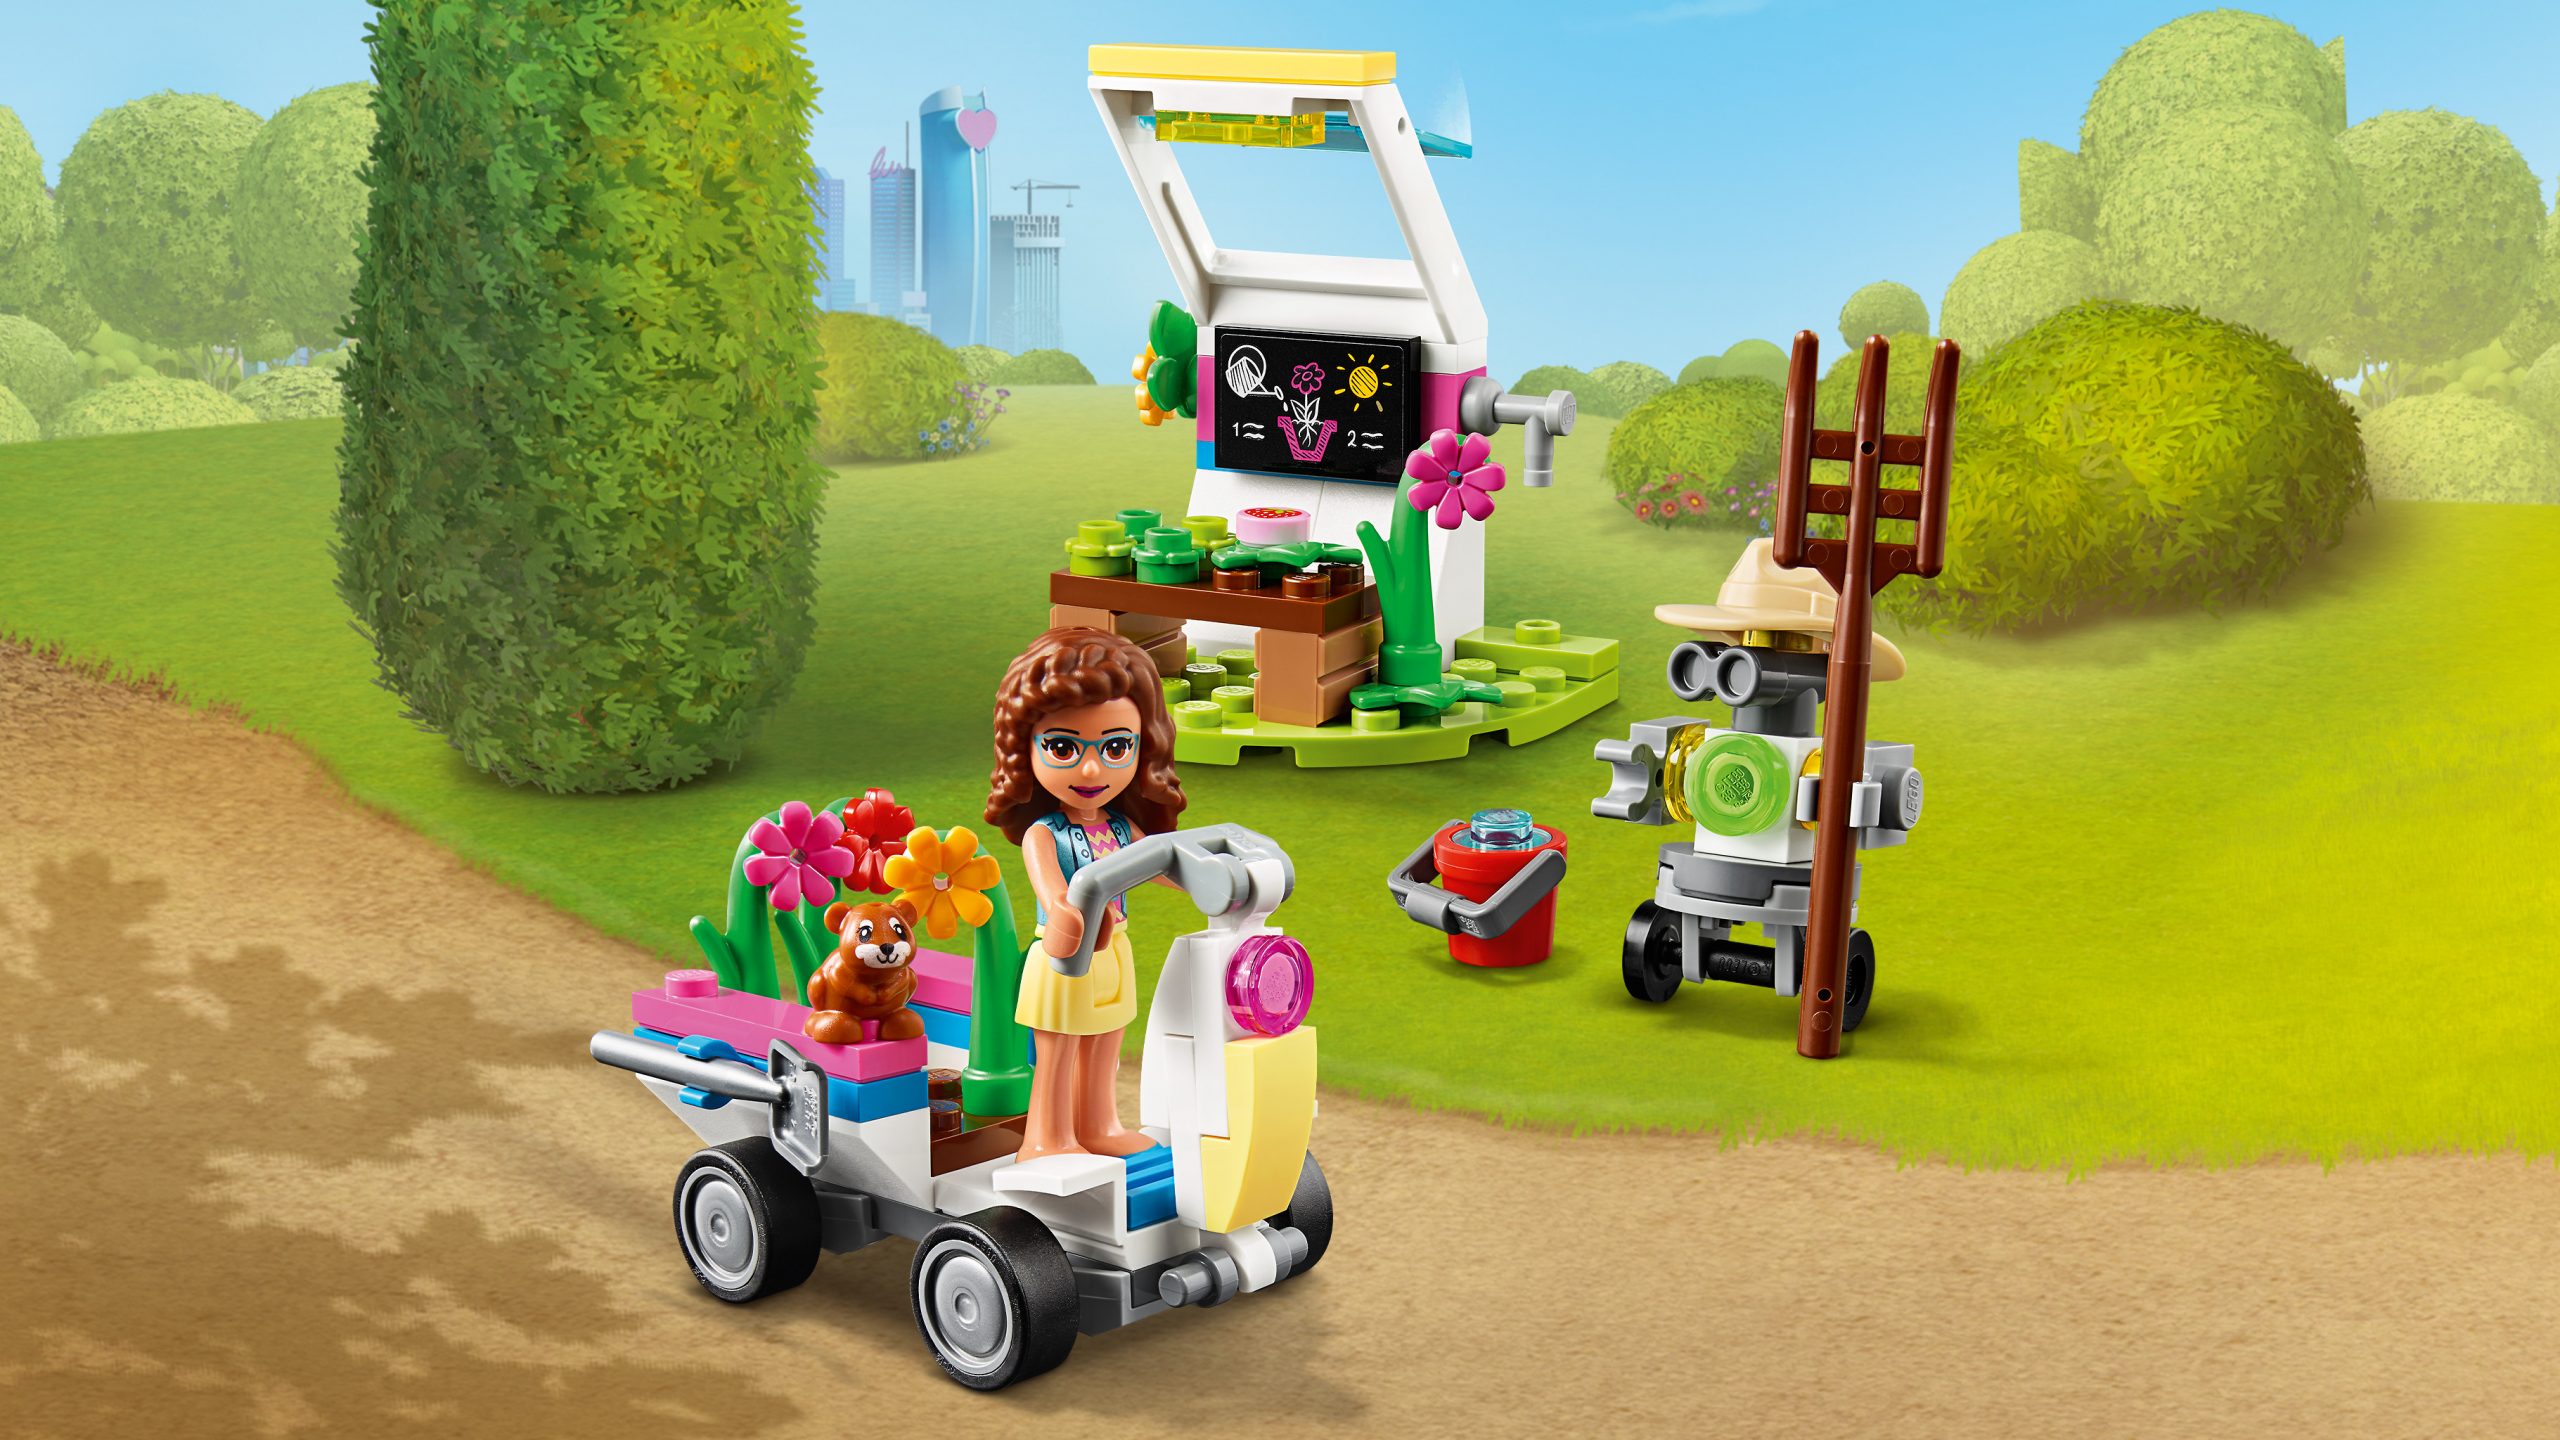 for Hours of Creative Play 92 Pieces Friends Olivia and Zobo LEGO Friends Olivia/’s Flower Garden 41425 Building Toy for Kids; This Play Garden Comes with 2 Buildable Figures New 2020